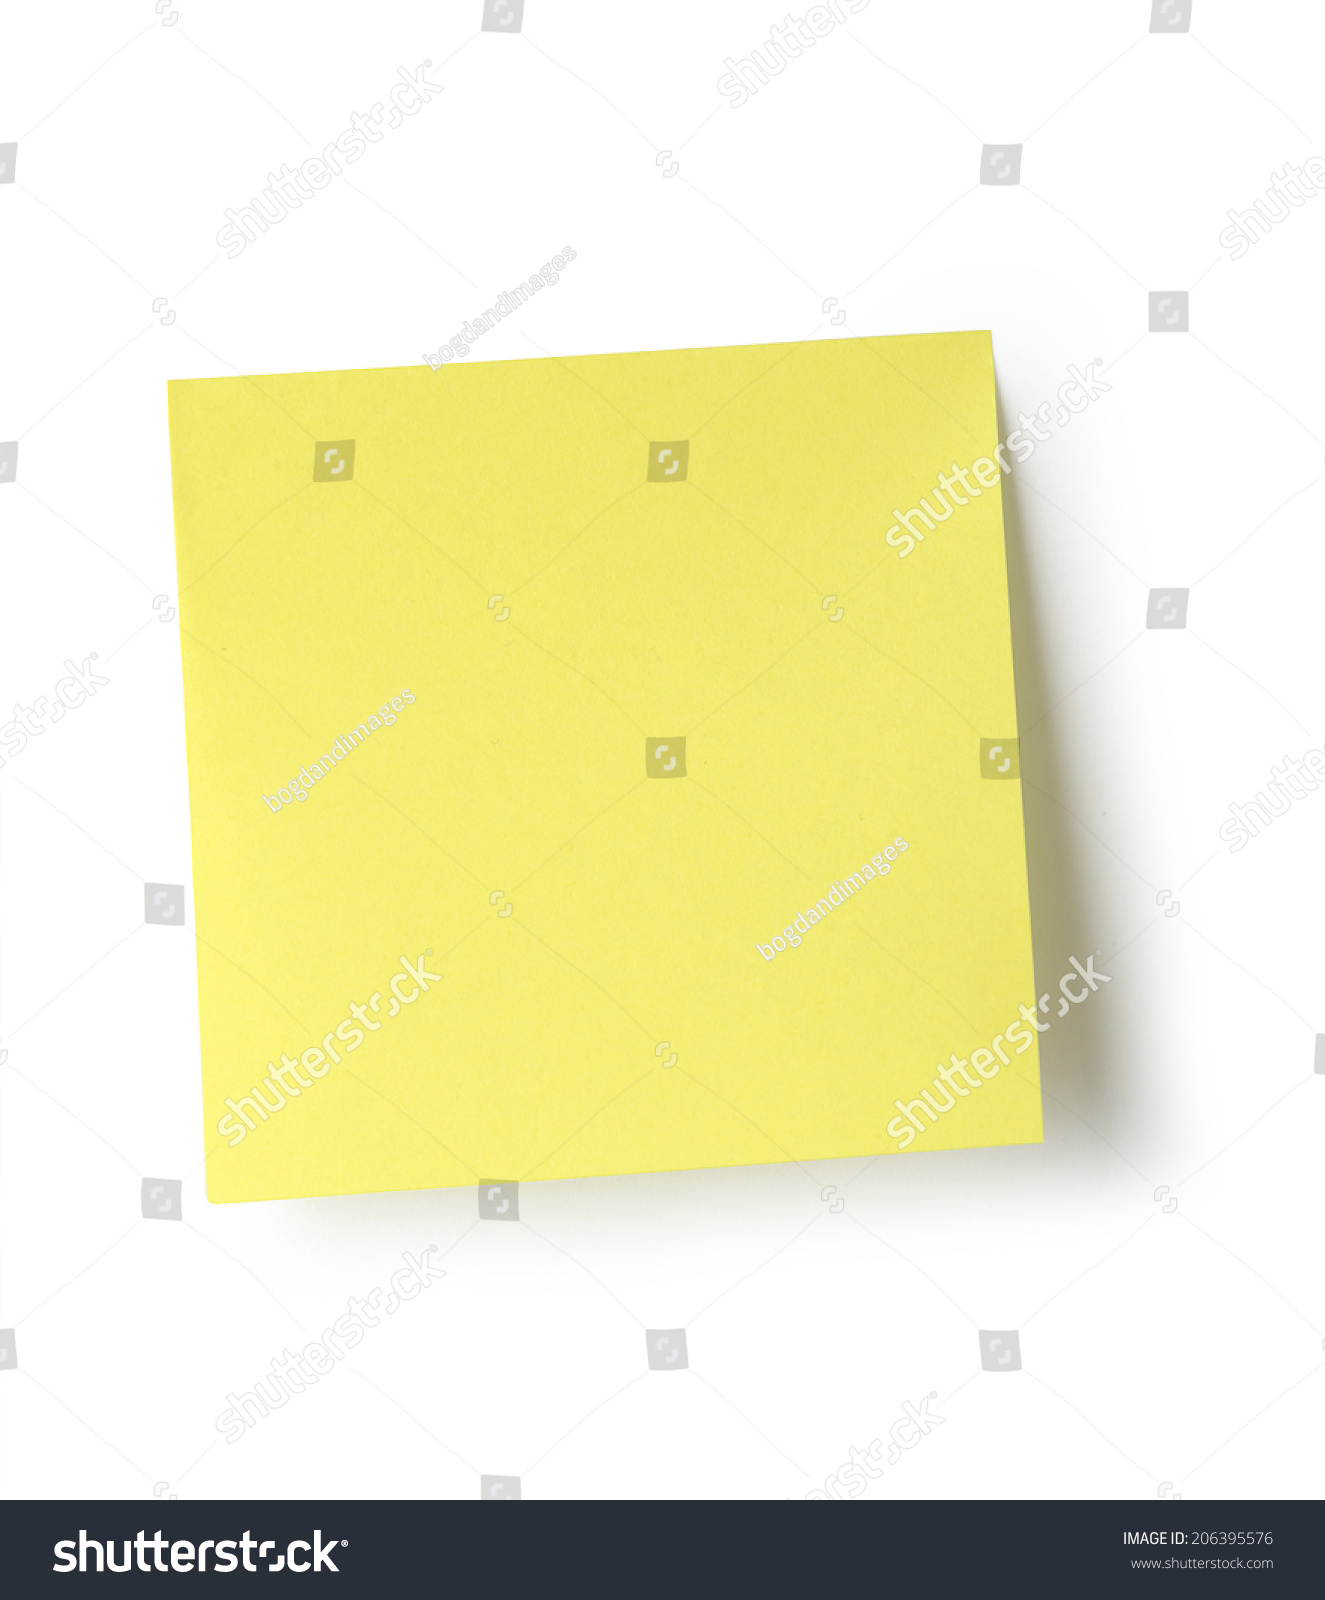 Sticky note isolated on white background with clipping path. #206395576